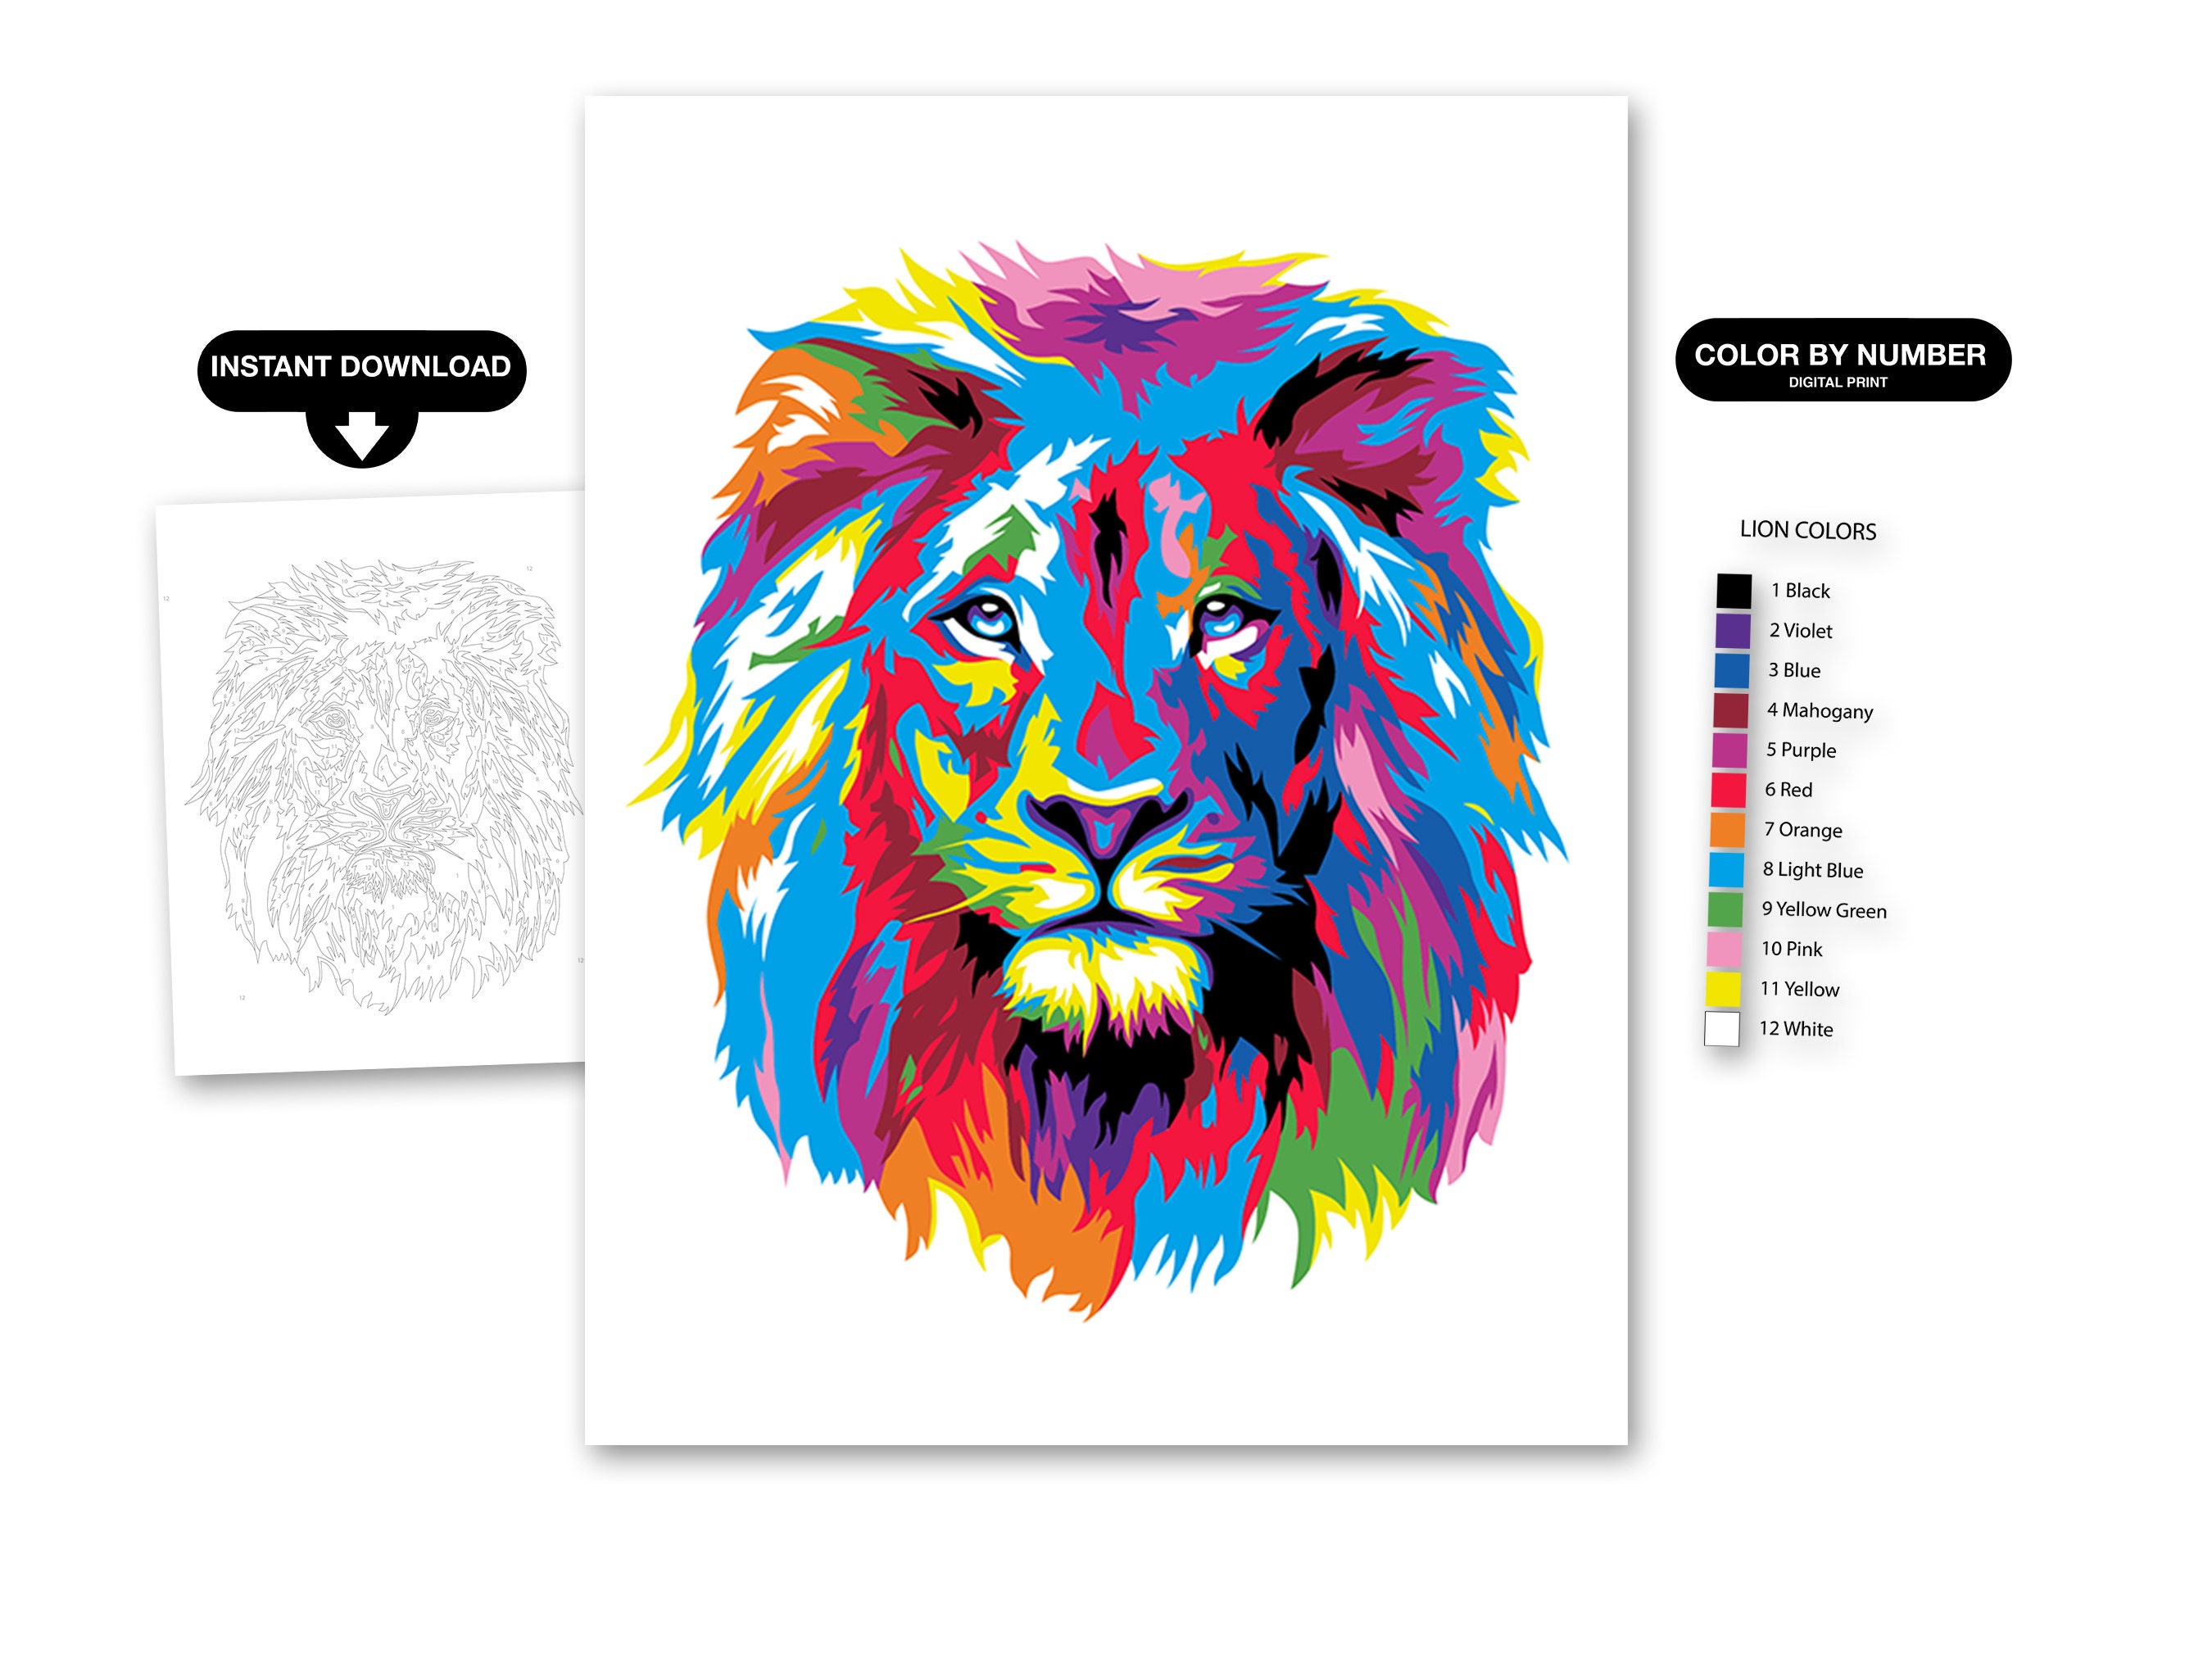 Lion & Giraffe Paint by Numbers Kit for Adults